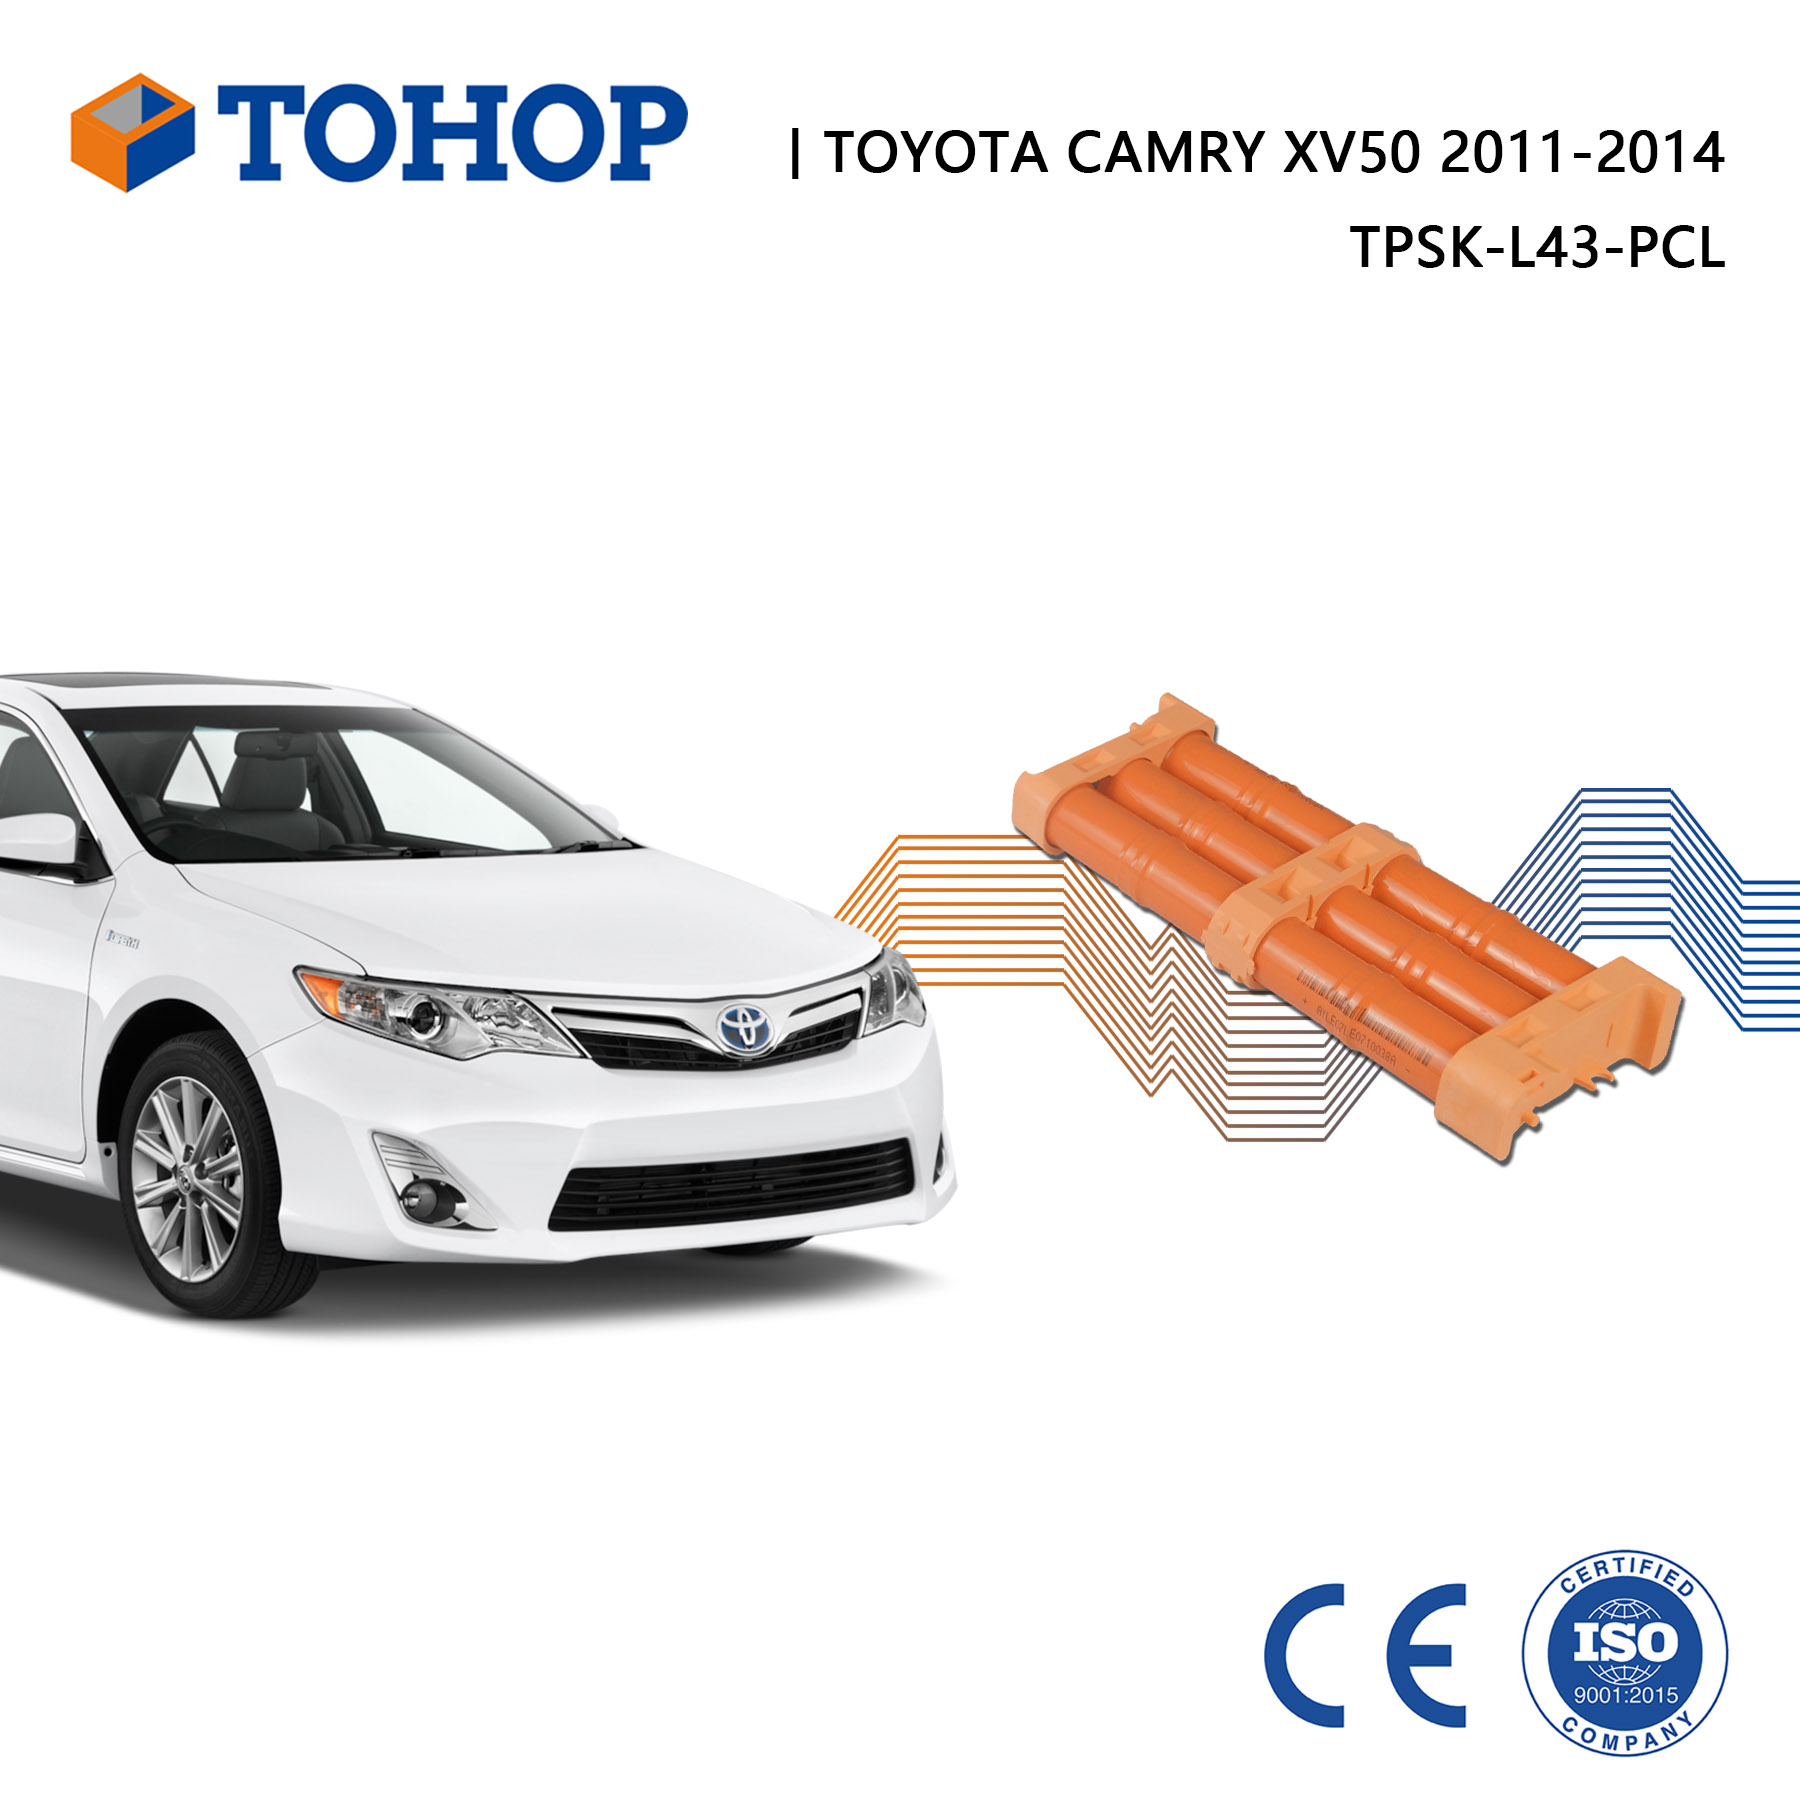 Batterie hybride pour Toyota Camry